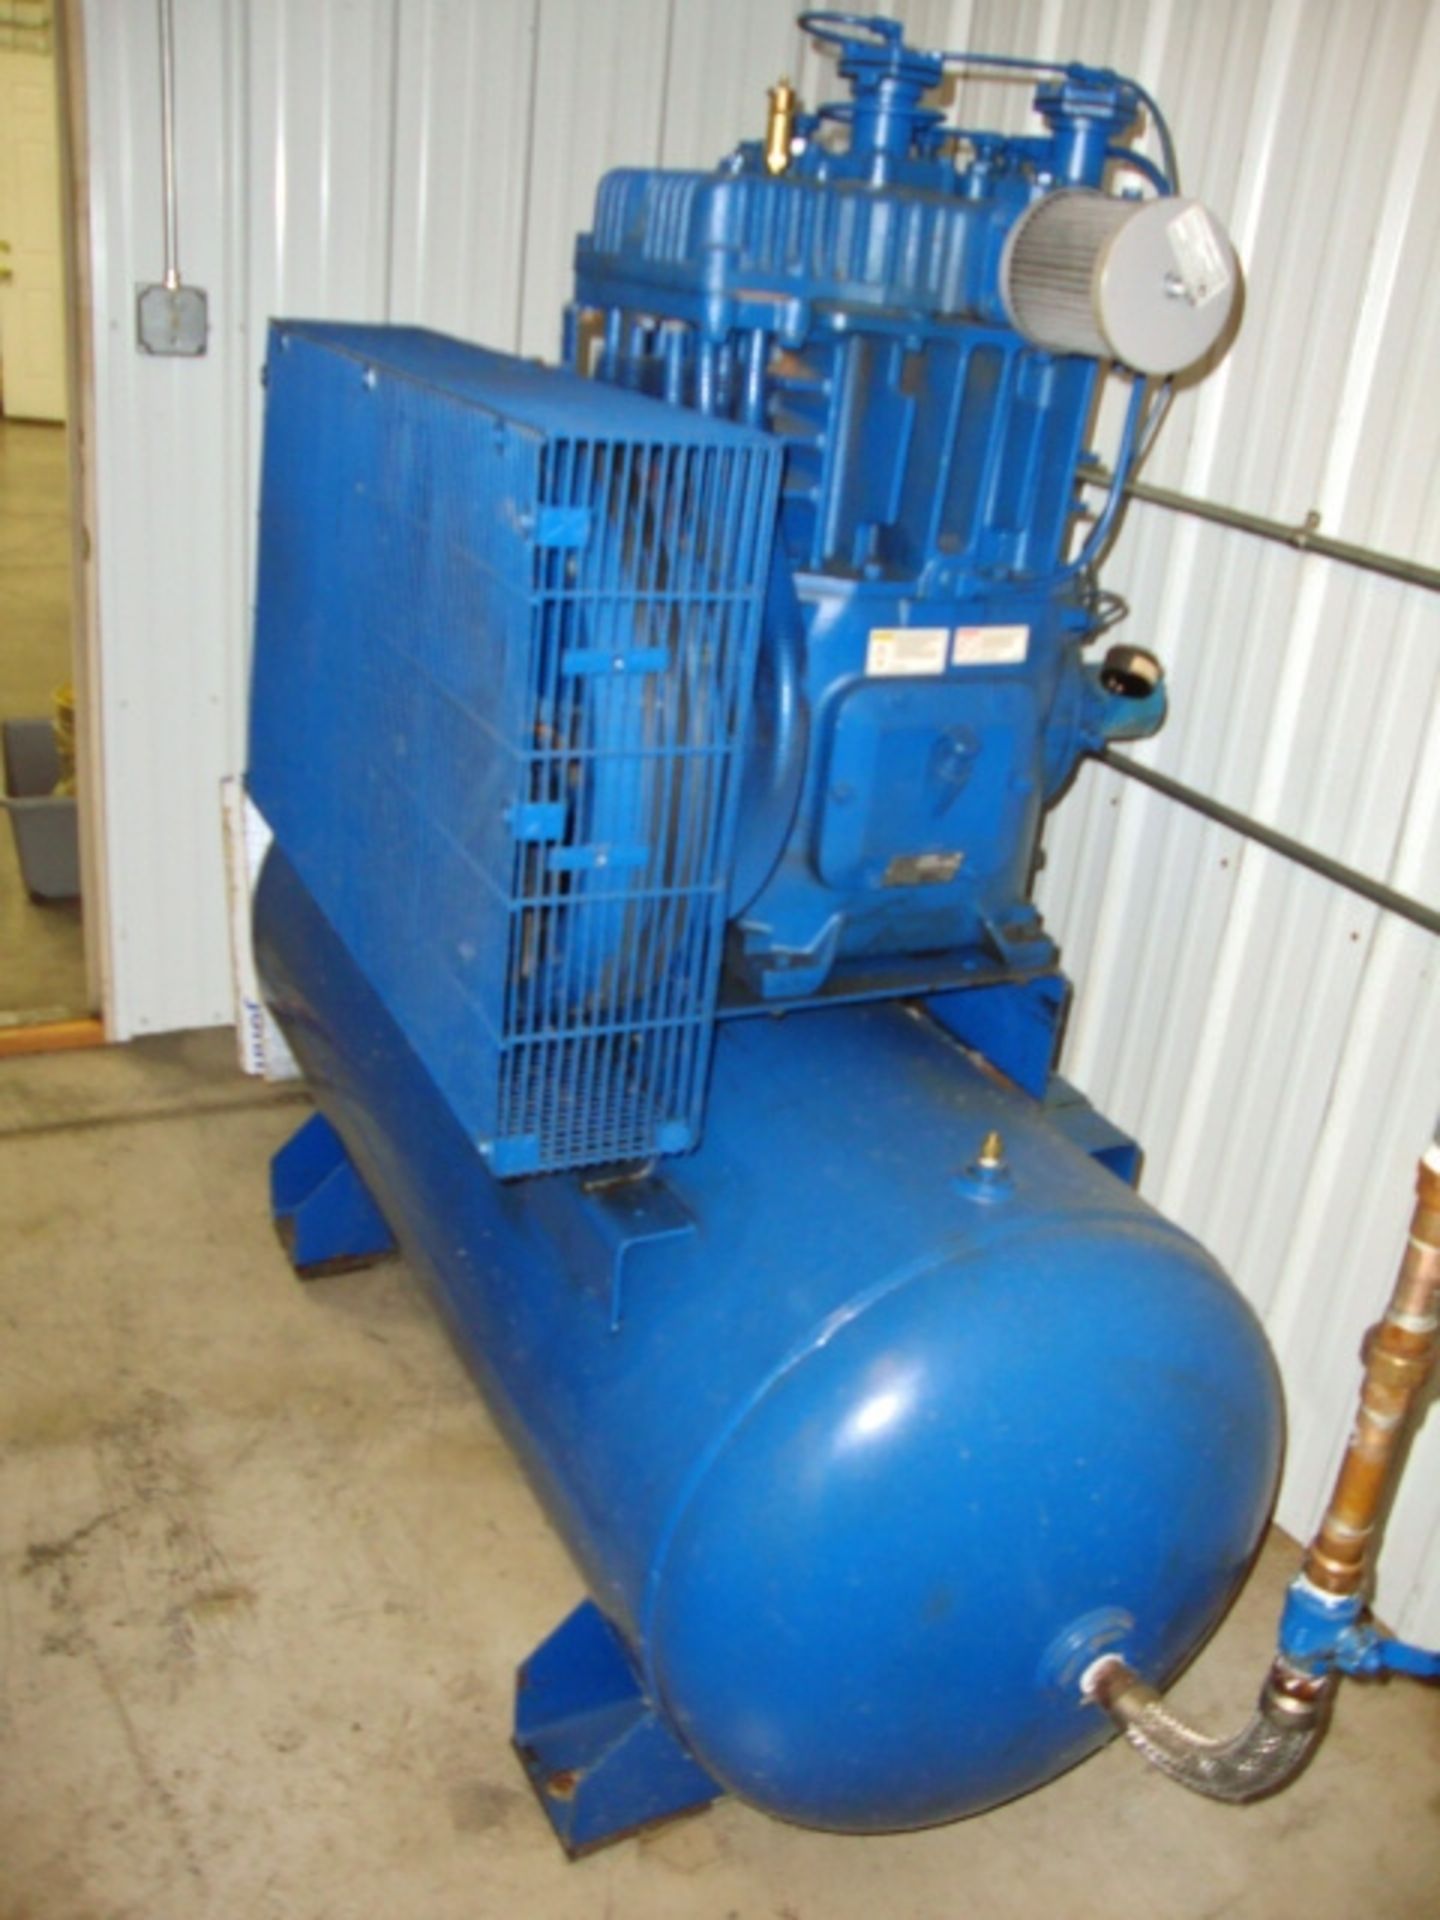 Quincy 10hp Compressor with 60gal Tank & Magnetic Starter, Model# 350QRB, 208-230V, 3ph - Image 2 of 5